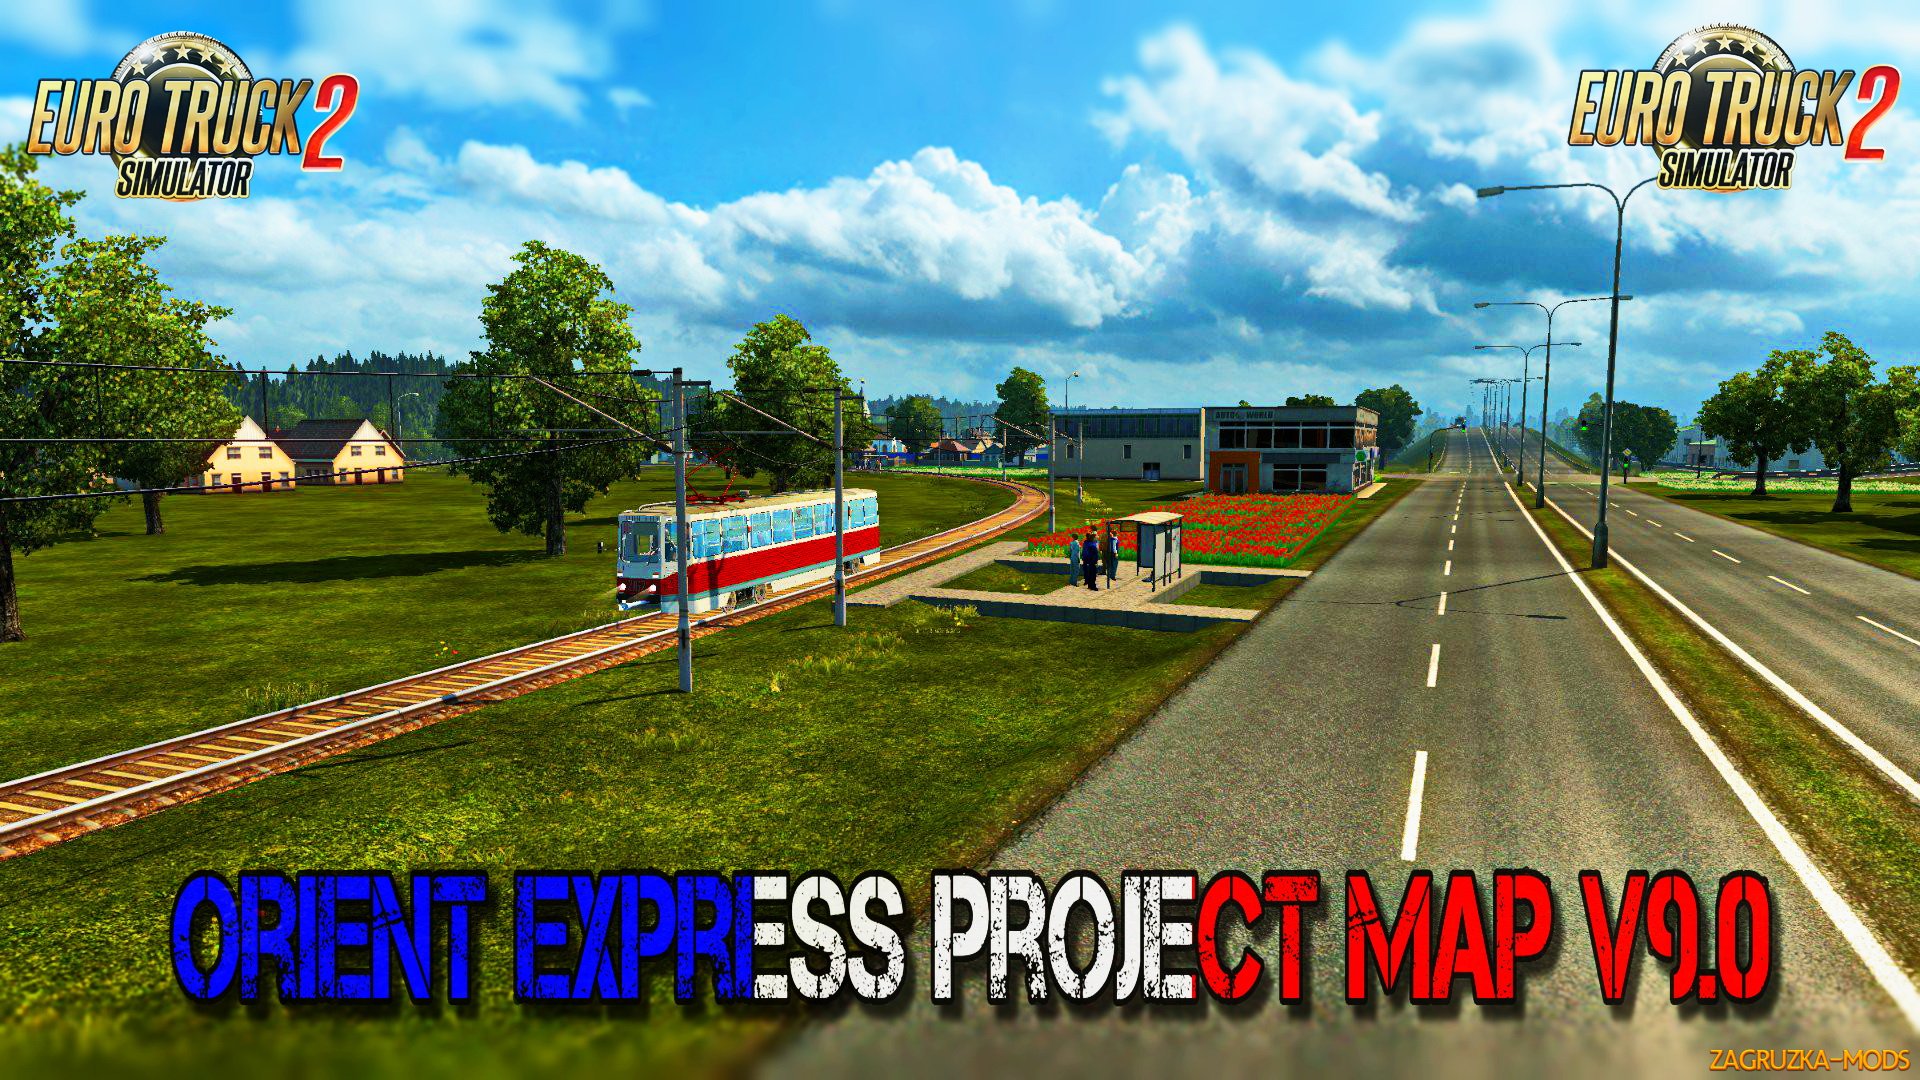 Orient Express Project Map v9.0 for ETS 2